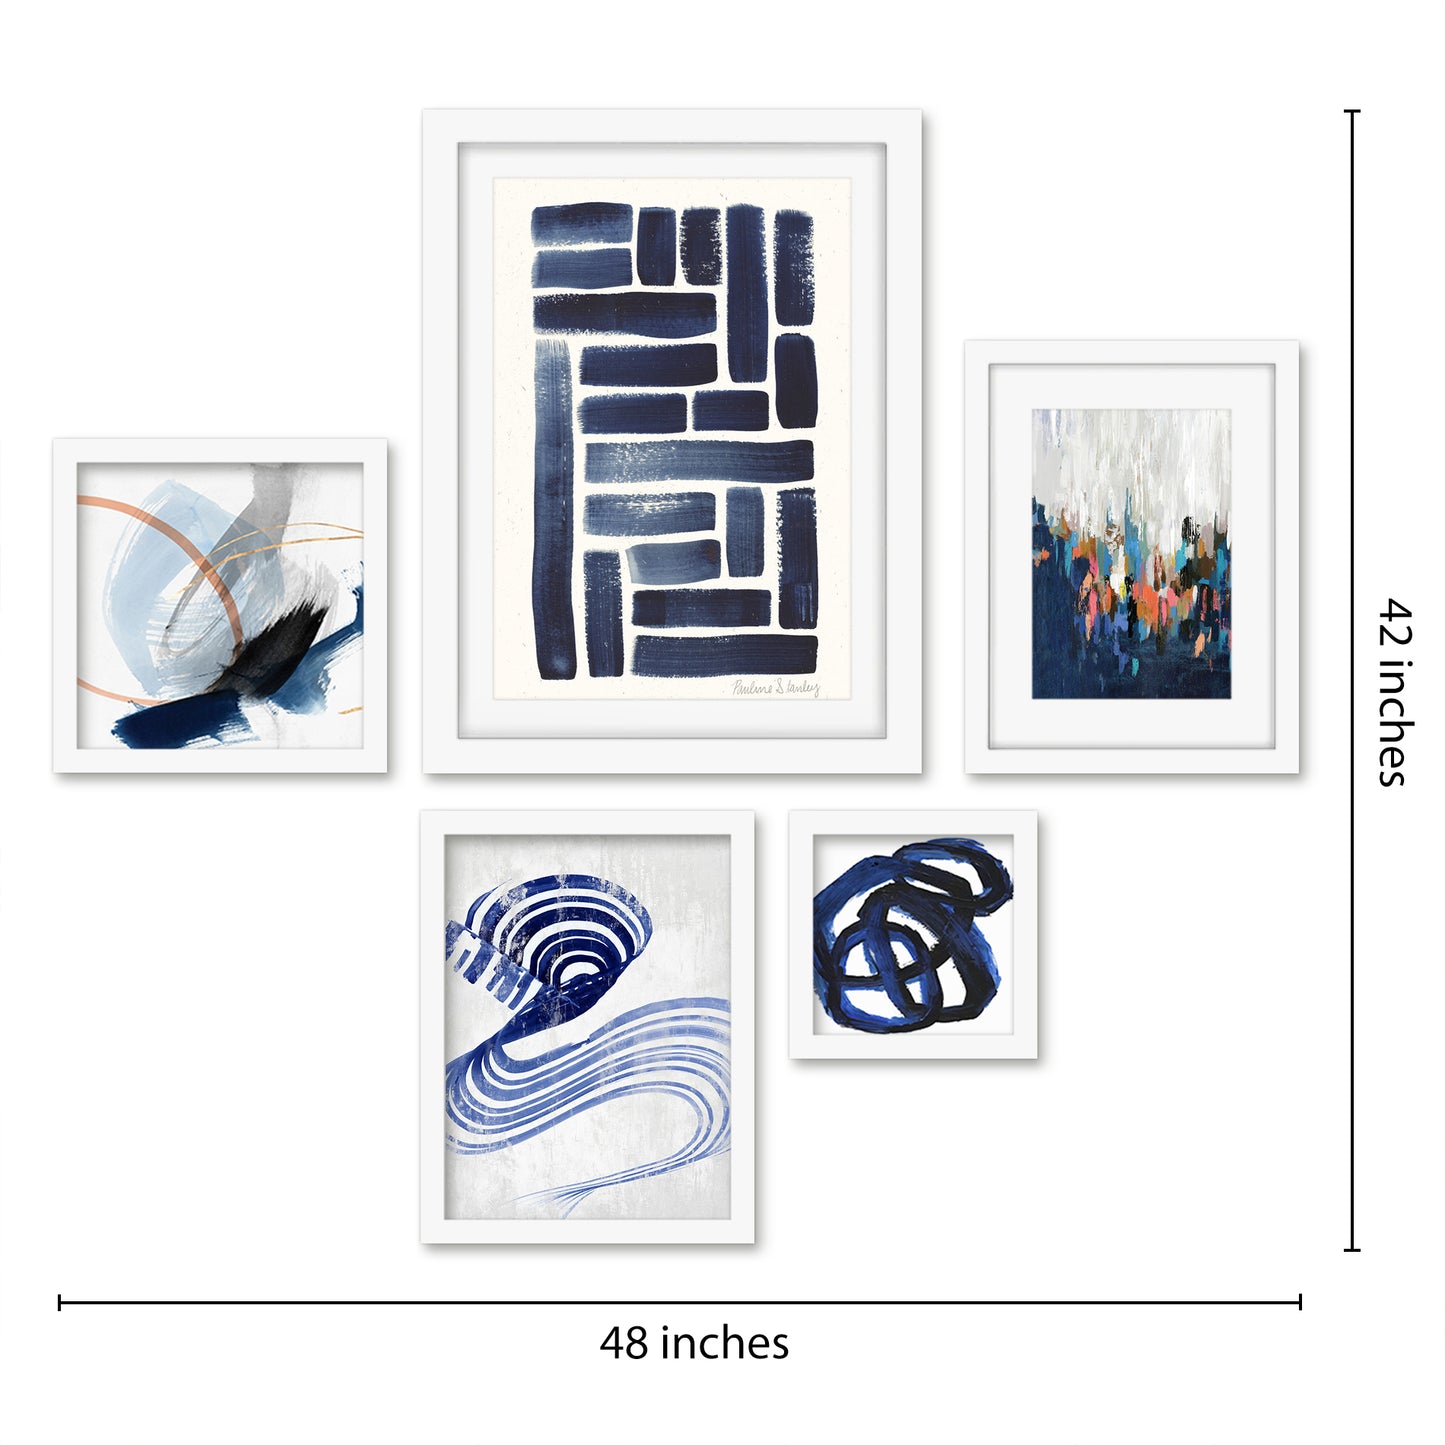 Americanflat 5 Piece Black Framed Gallery Wall Art Set - Blue Abstract Shapes Pattern